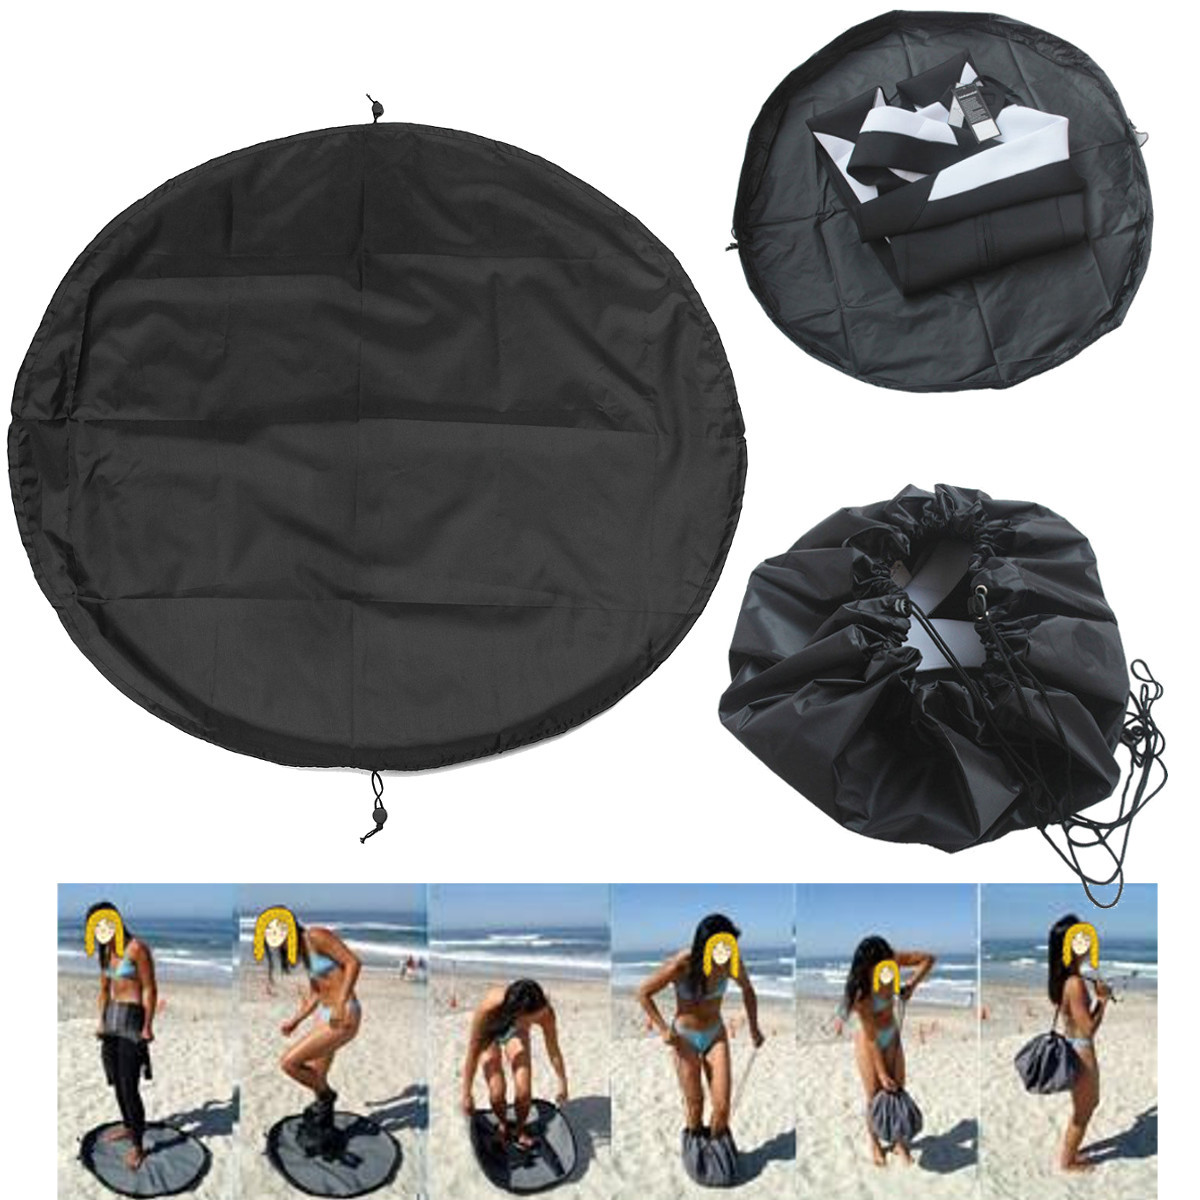 

IPRee® Nylon 90cm Surfing Wetsuit Diving Suit Change Bag Mat Waterproof Bag Carry Pack Pouch